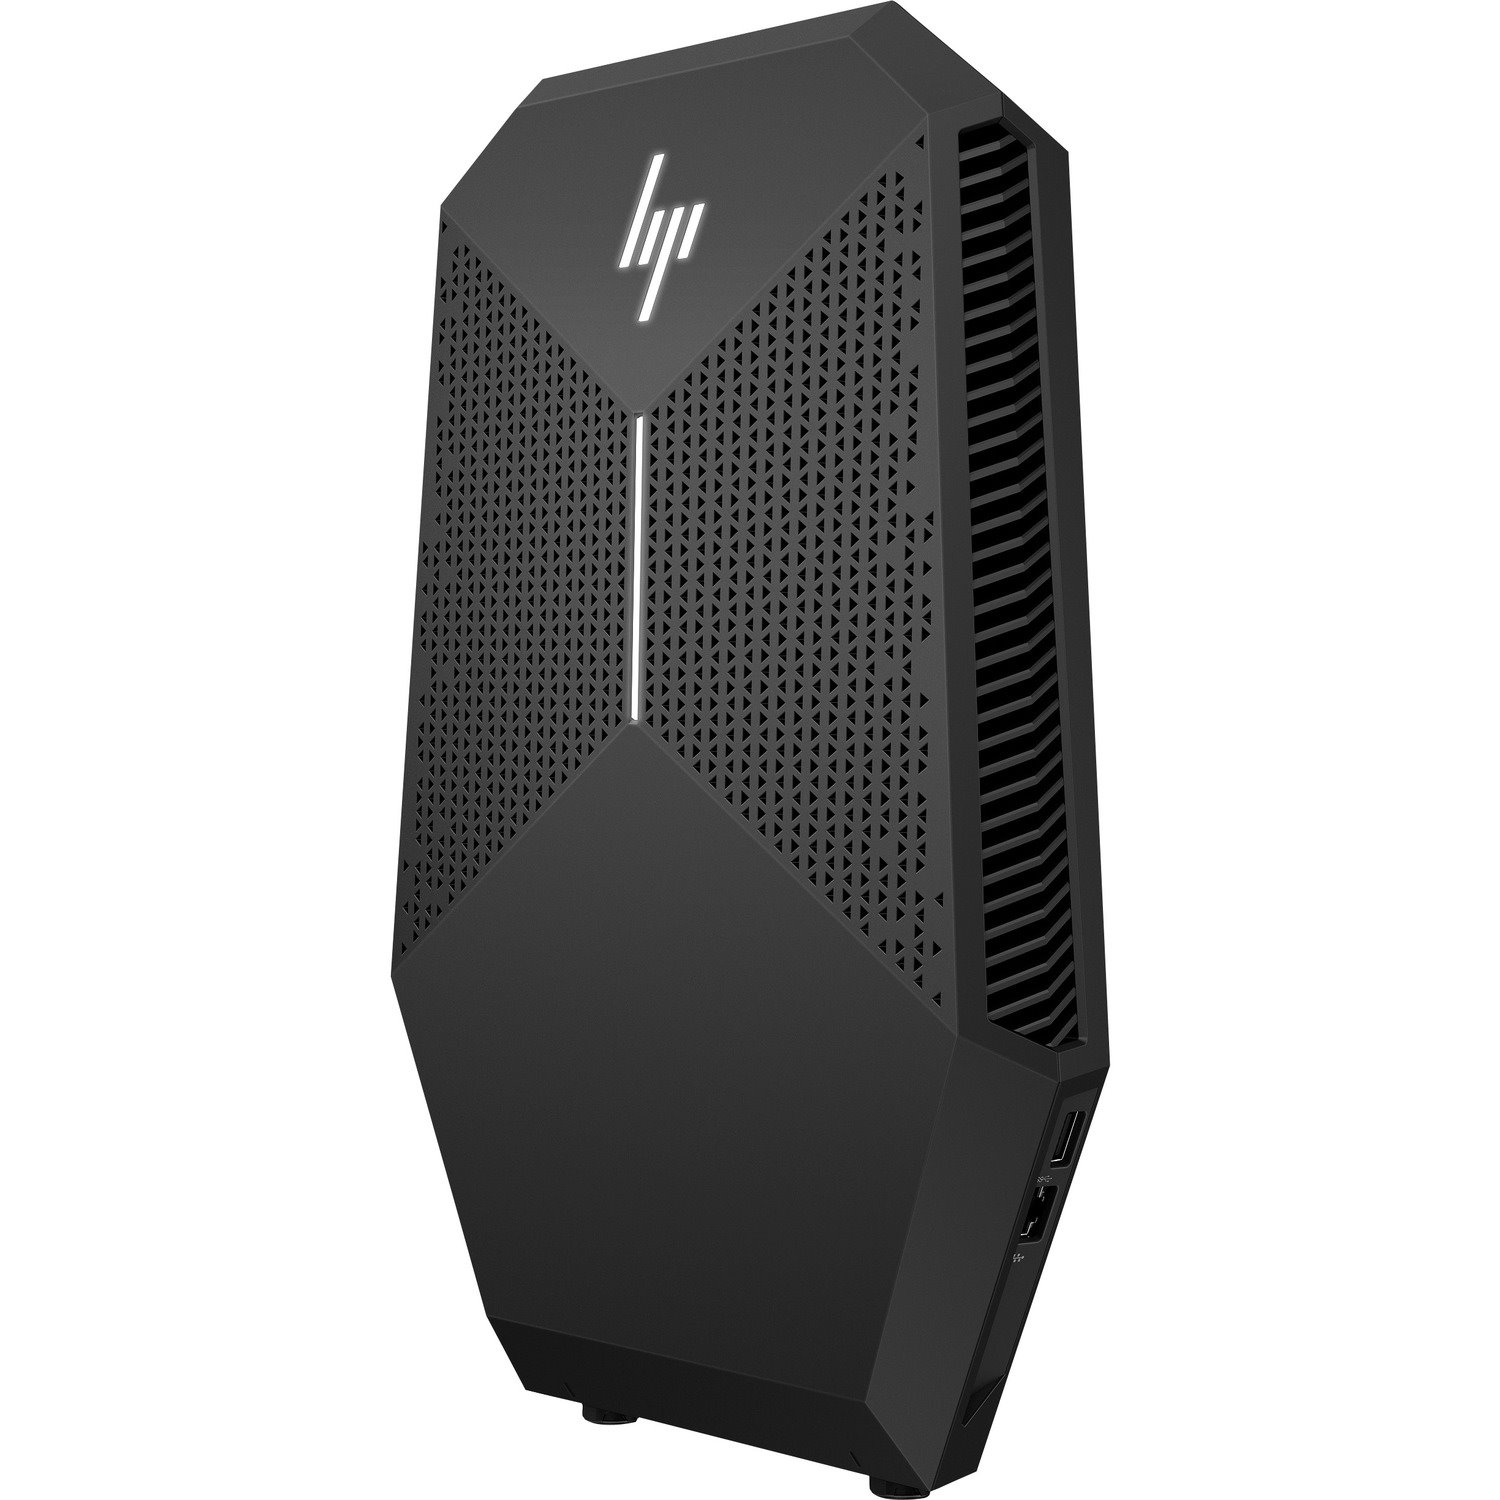 HP Z VR G2 Backpack Workstation - Intel Core i7 8th Gen i7-8850H - 32 GB - 1 TB SSD - Small Form Factor